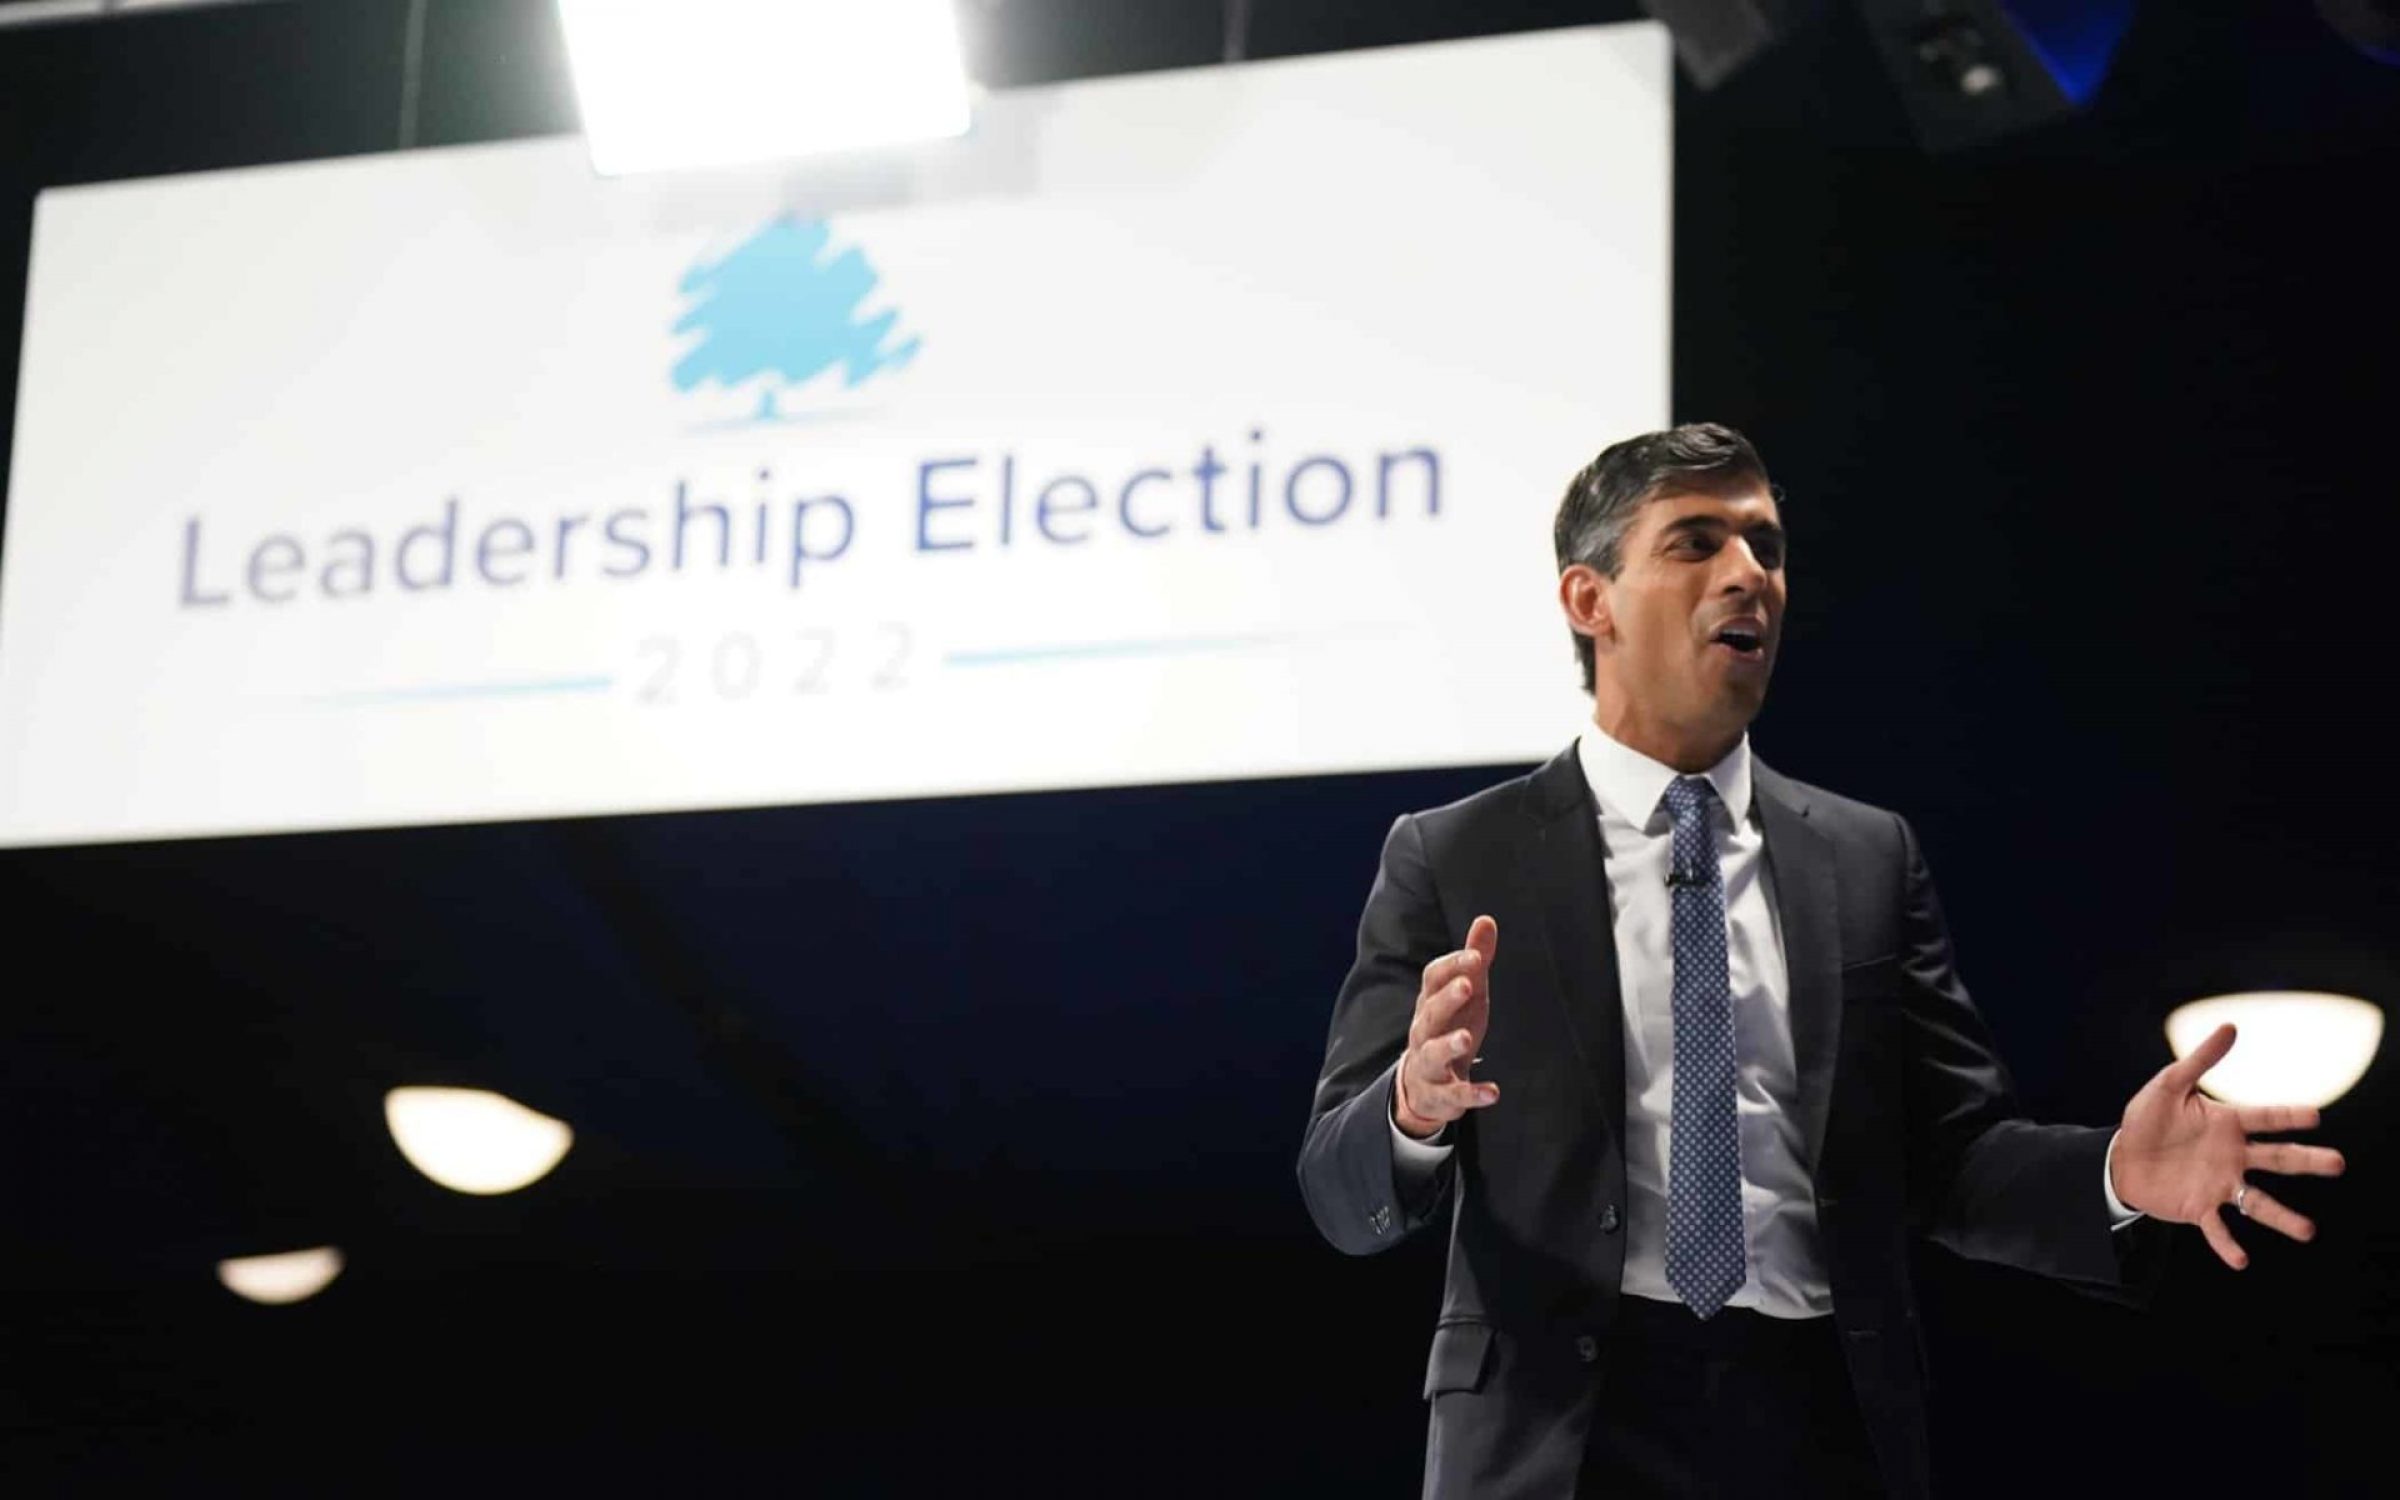 Conservative leadership candidate Rishi Sunak speaking at a hustings event at the Pavilion conference centre at Elland Road in Leeds. Picture date: Thursday July 28, 2022.